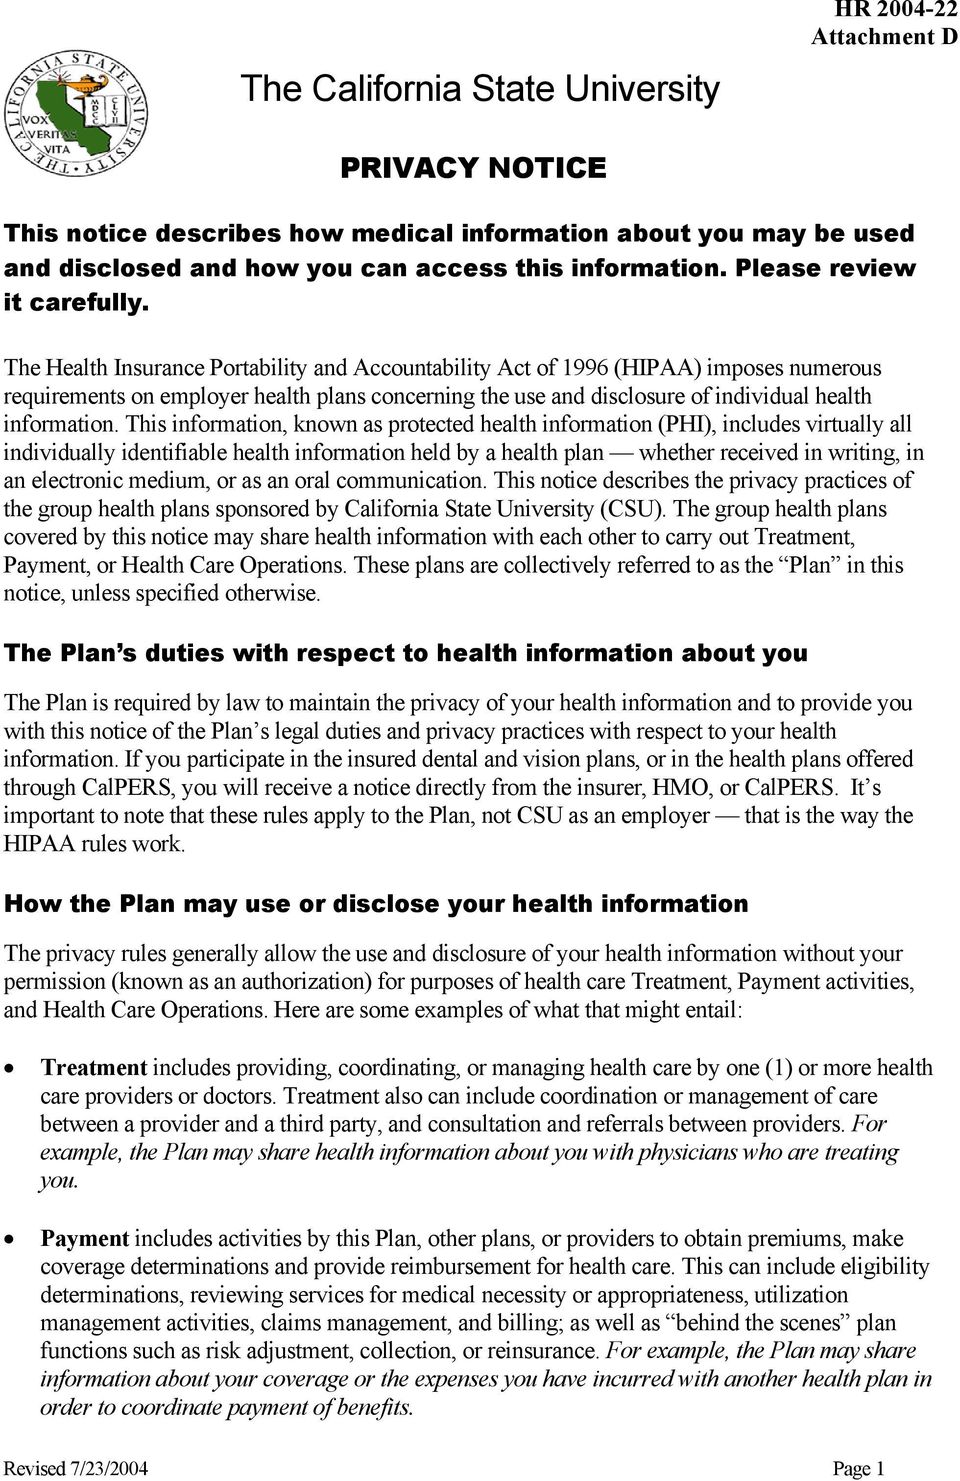 The Health Insurance Portability and Accountability Act of 1996 (HIPAA) imposes numerous requirements on employer health plans concerning the use and disclosure of individual health information.